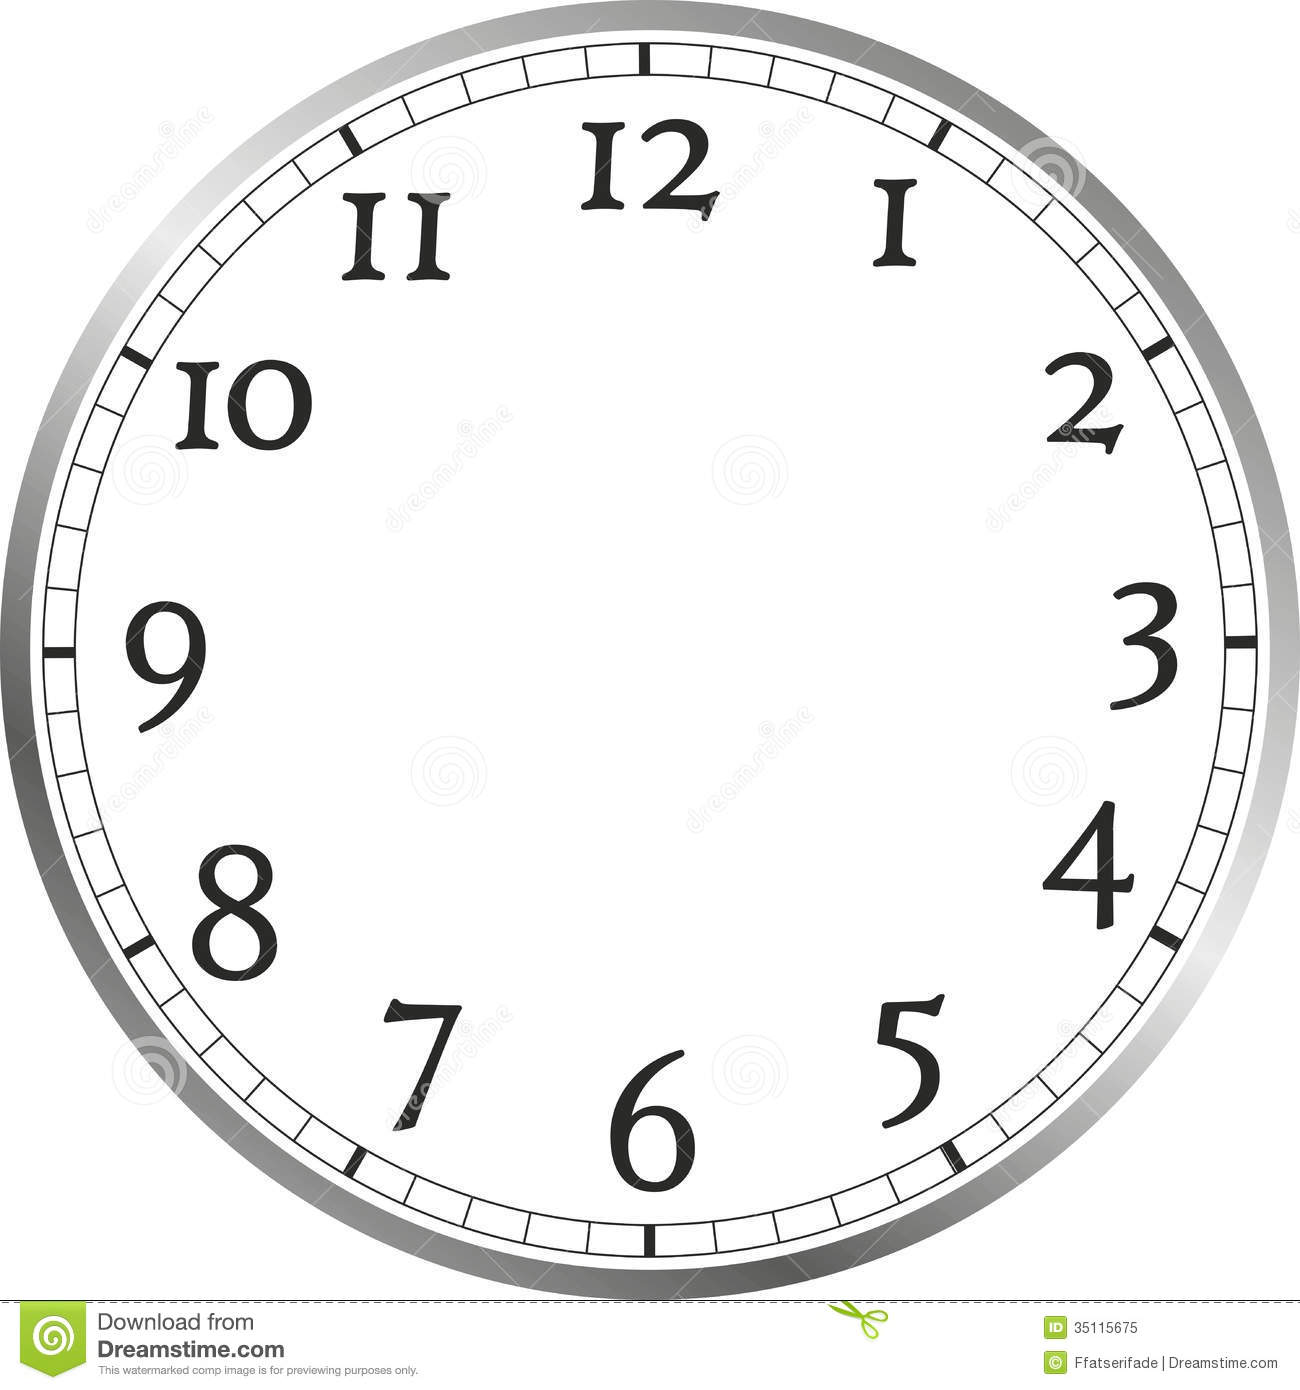 Clock Face No Hands Png : Look at links below to get more options for ...